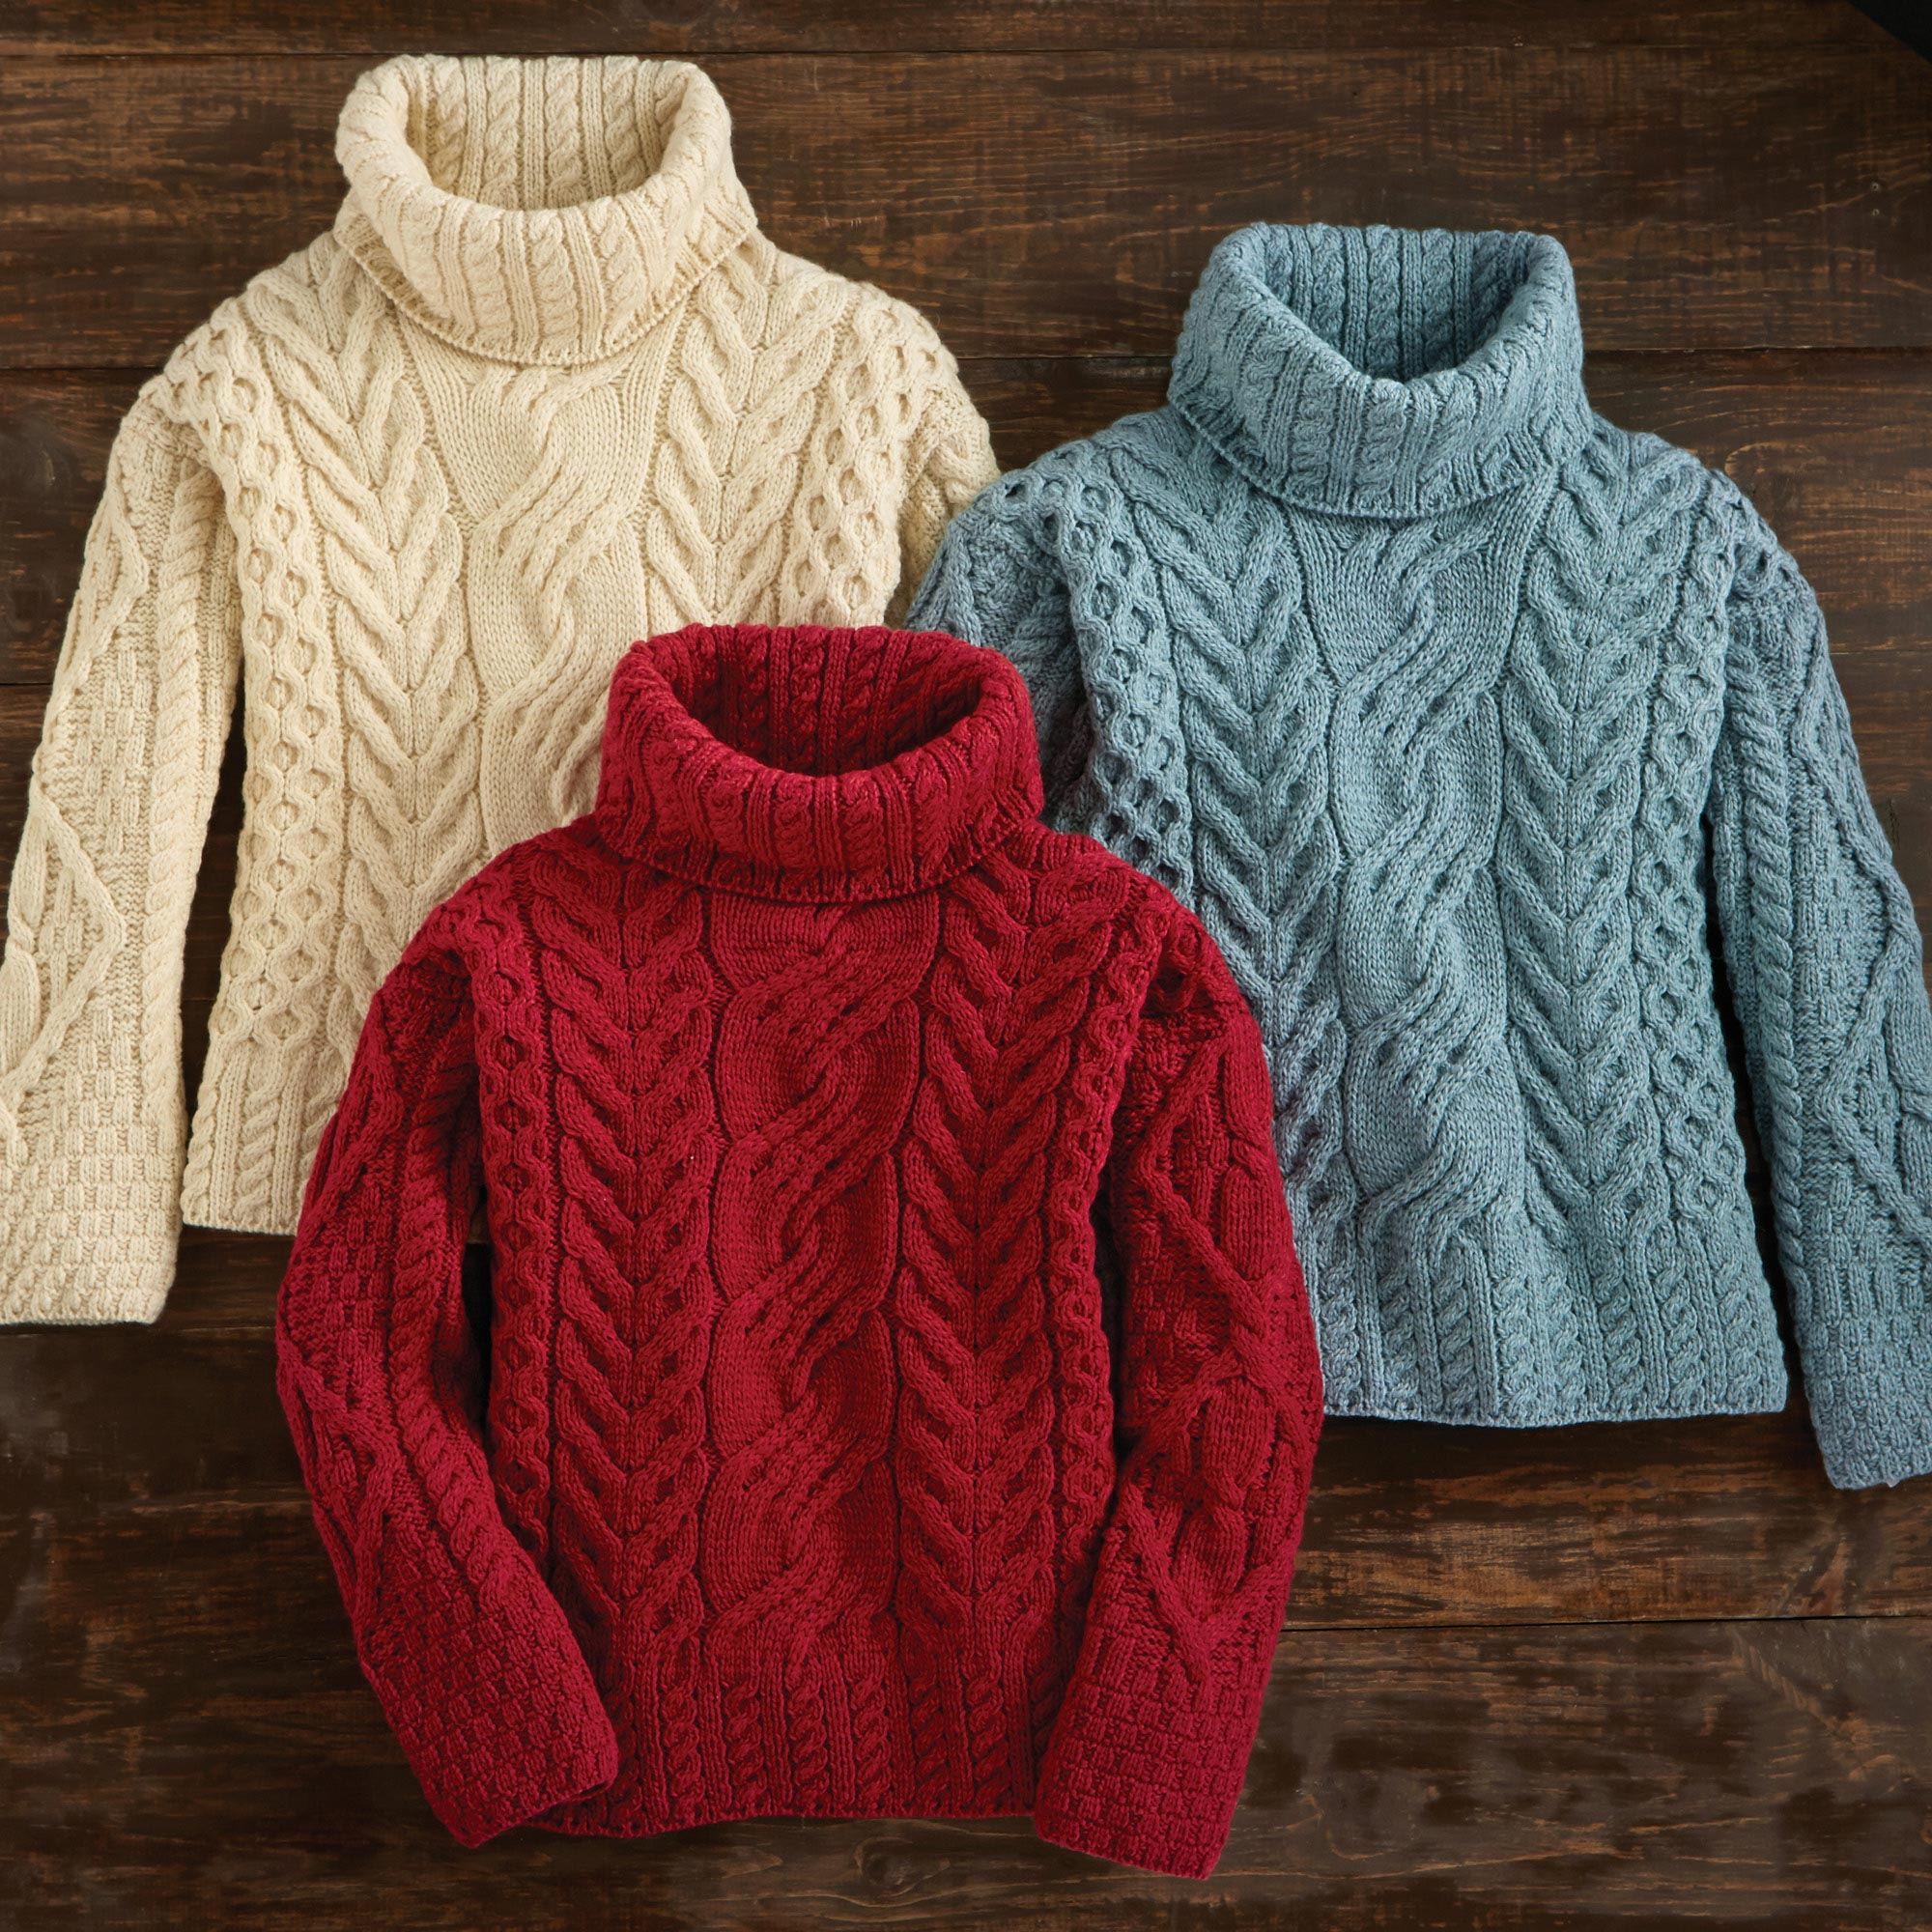 WOMEN'S SWEATERS - Handcrafted women's sweaters at NOVICA